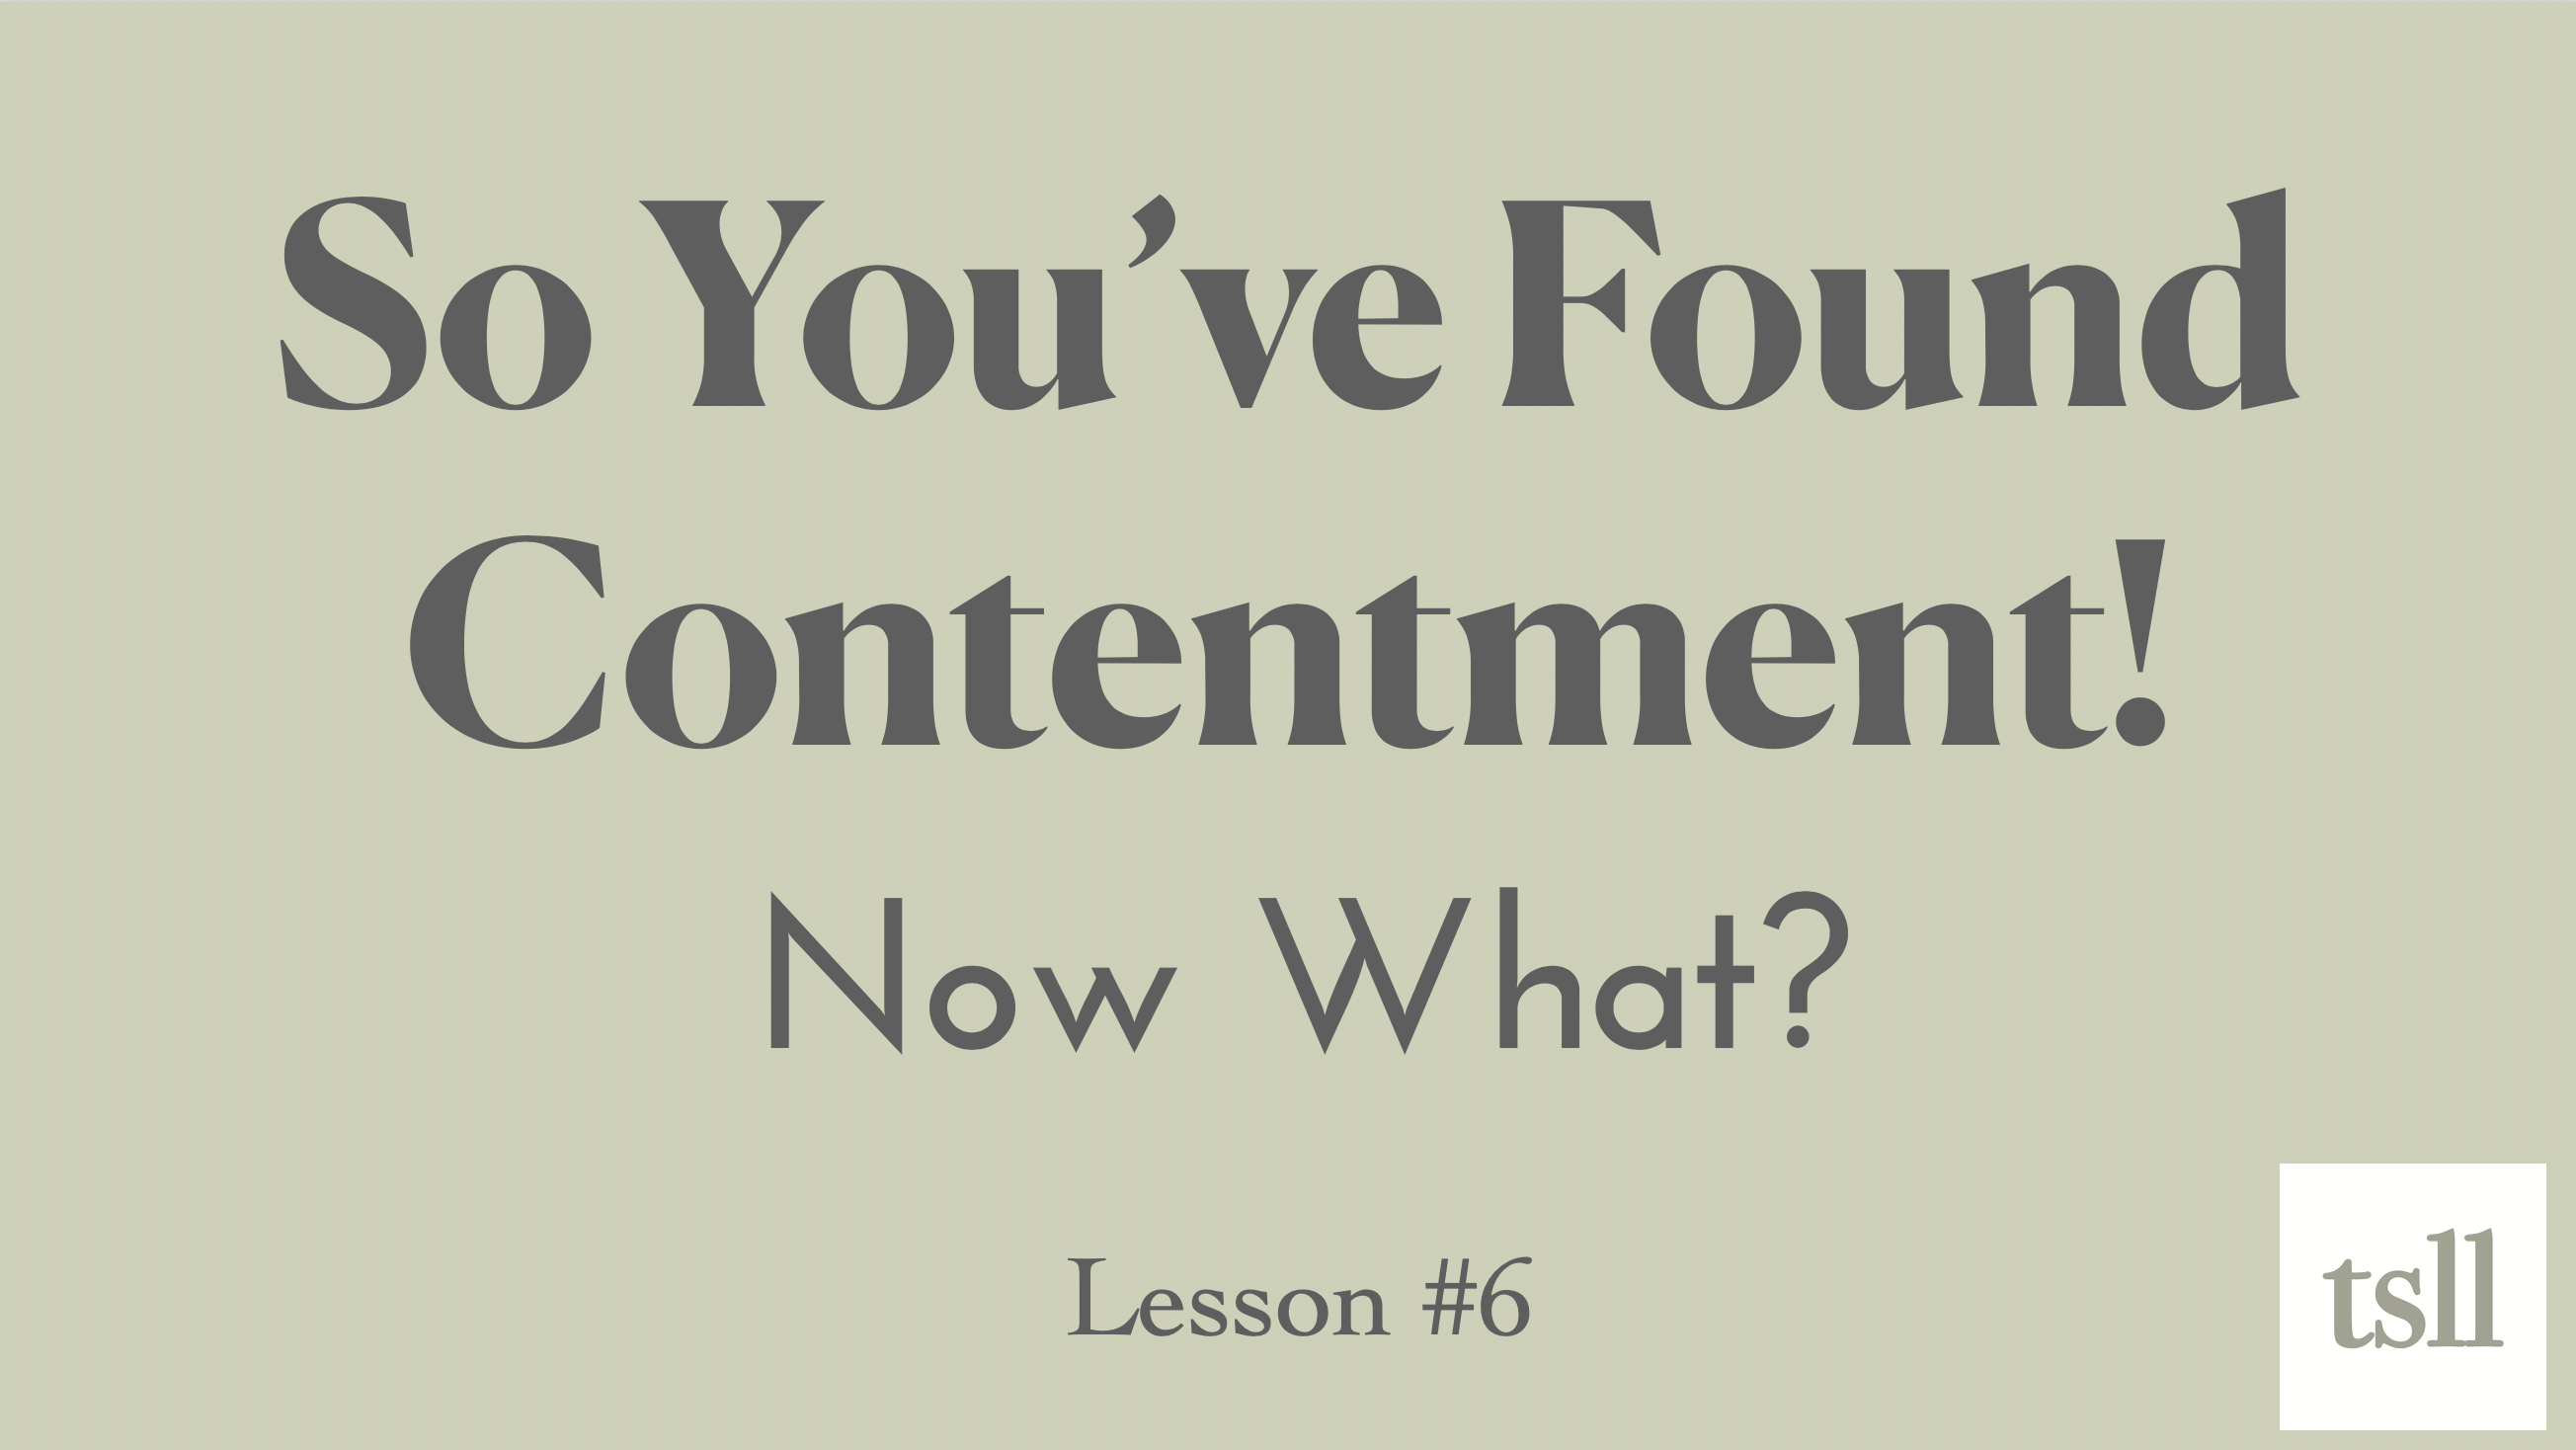 Part 6: So, You’ve Found Your Contentment. Now What? (11:47)